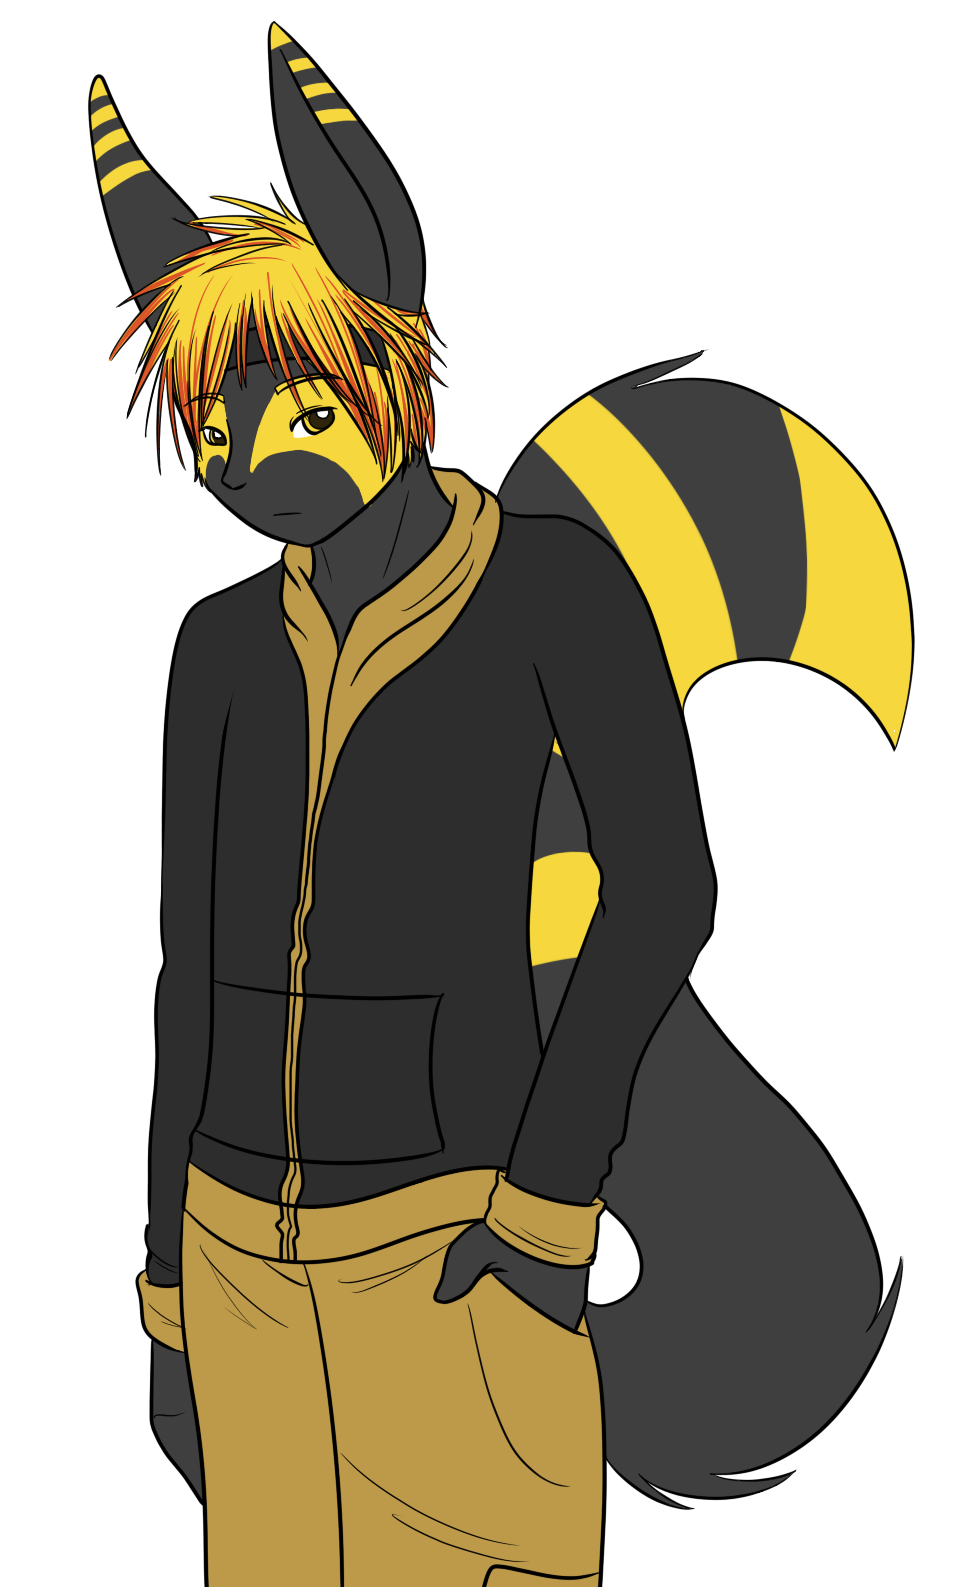 One of my first images of Clintz. He had much more basic markings, and some wild, spiky hair. 